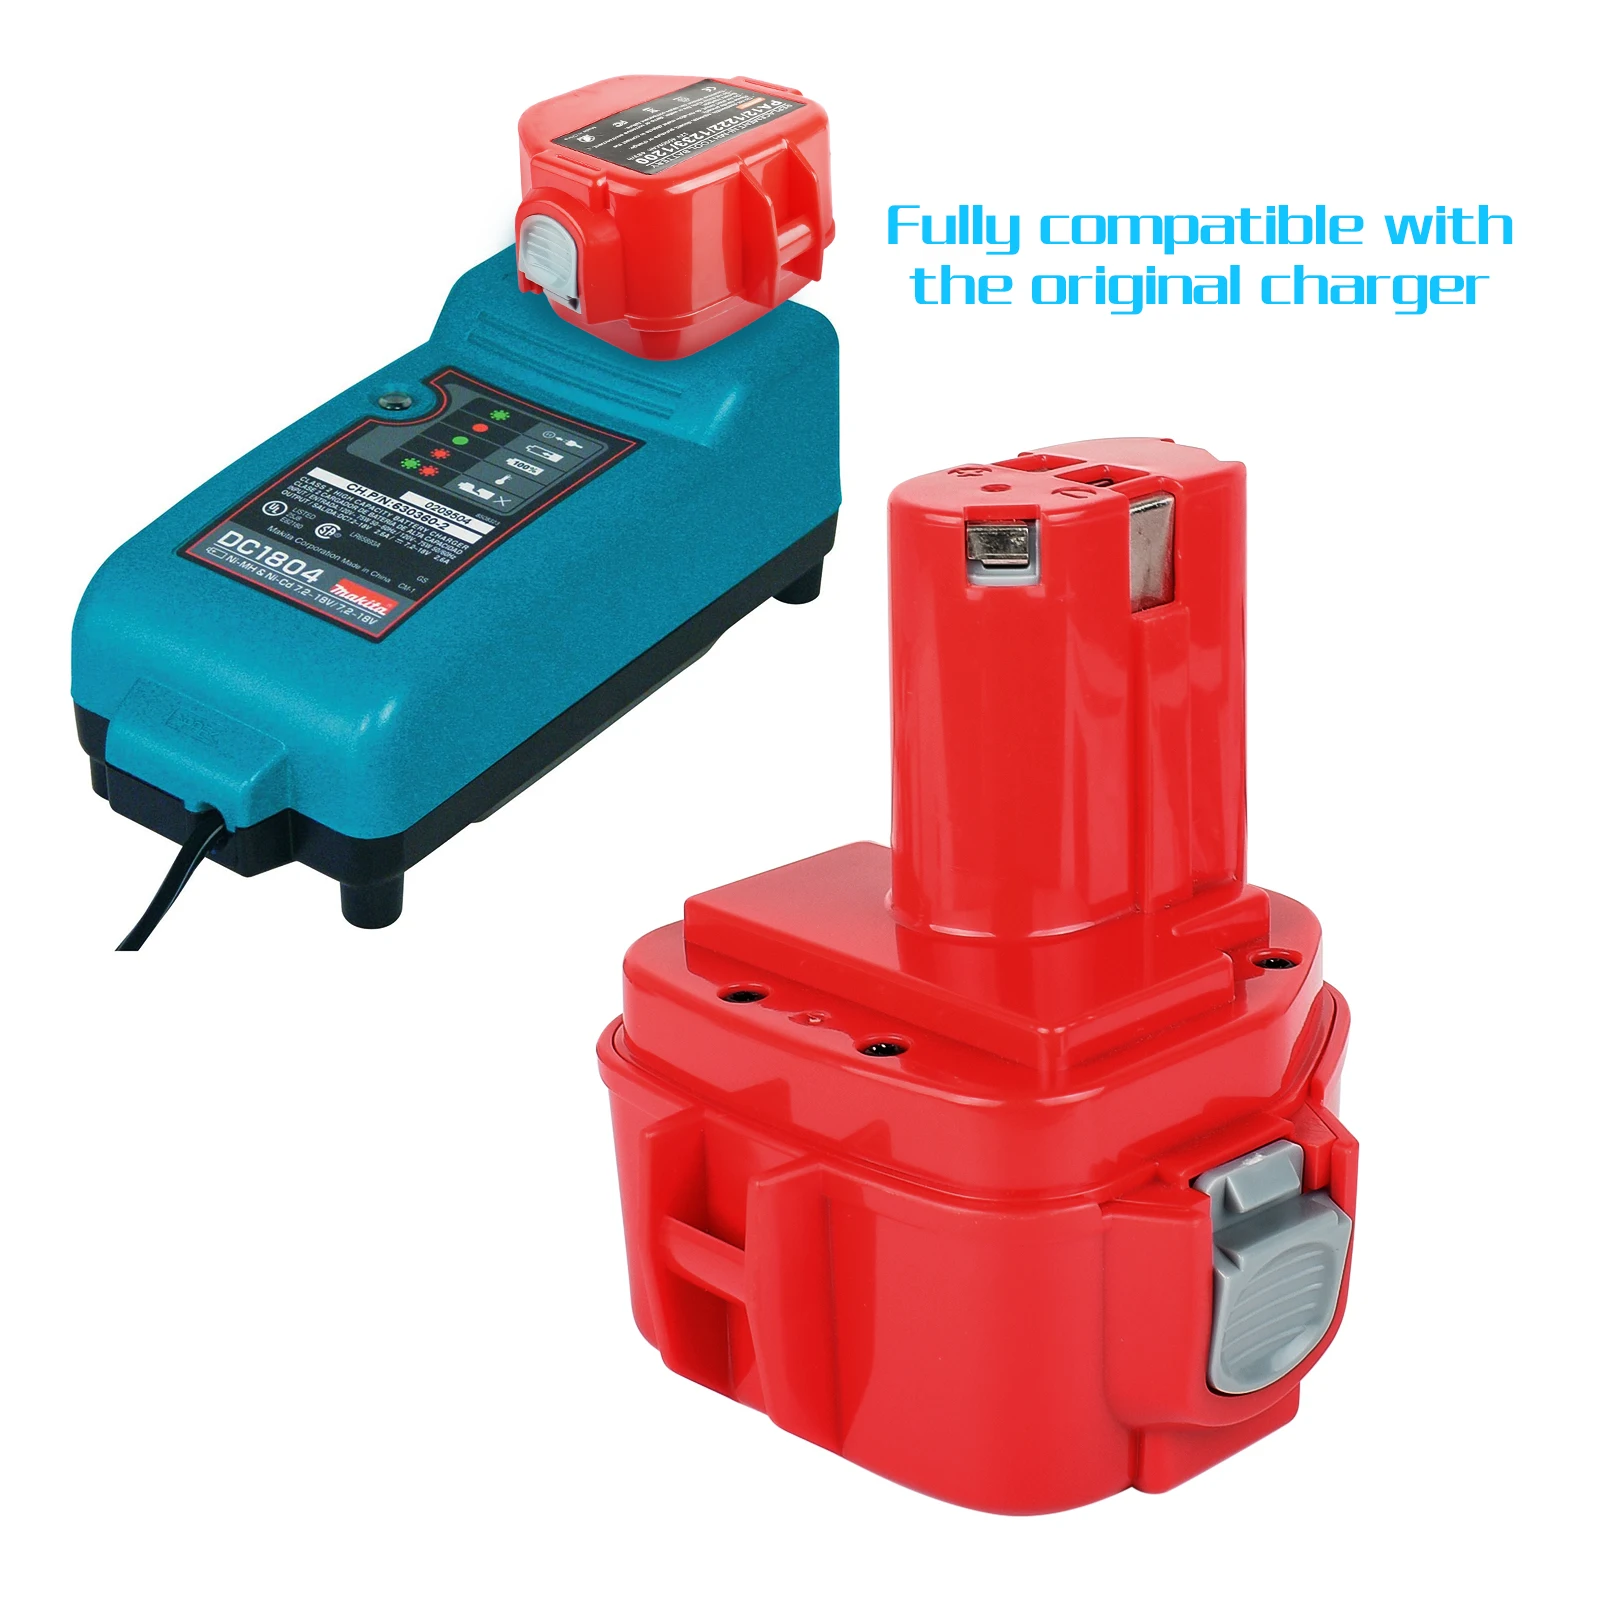 for Makita 12V 3000 mAh rechargeable battery for power tools for Mak drill  PA12 1050, 1220, 1234, 4000 5000, 6200, 6300 Ser - AliExpress